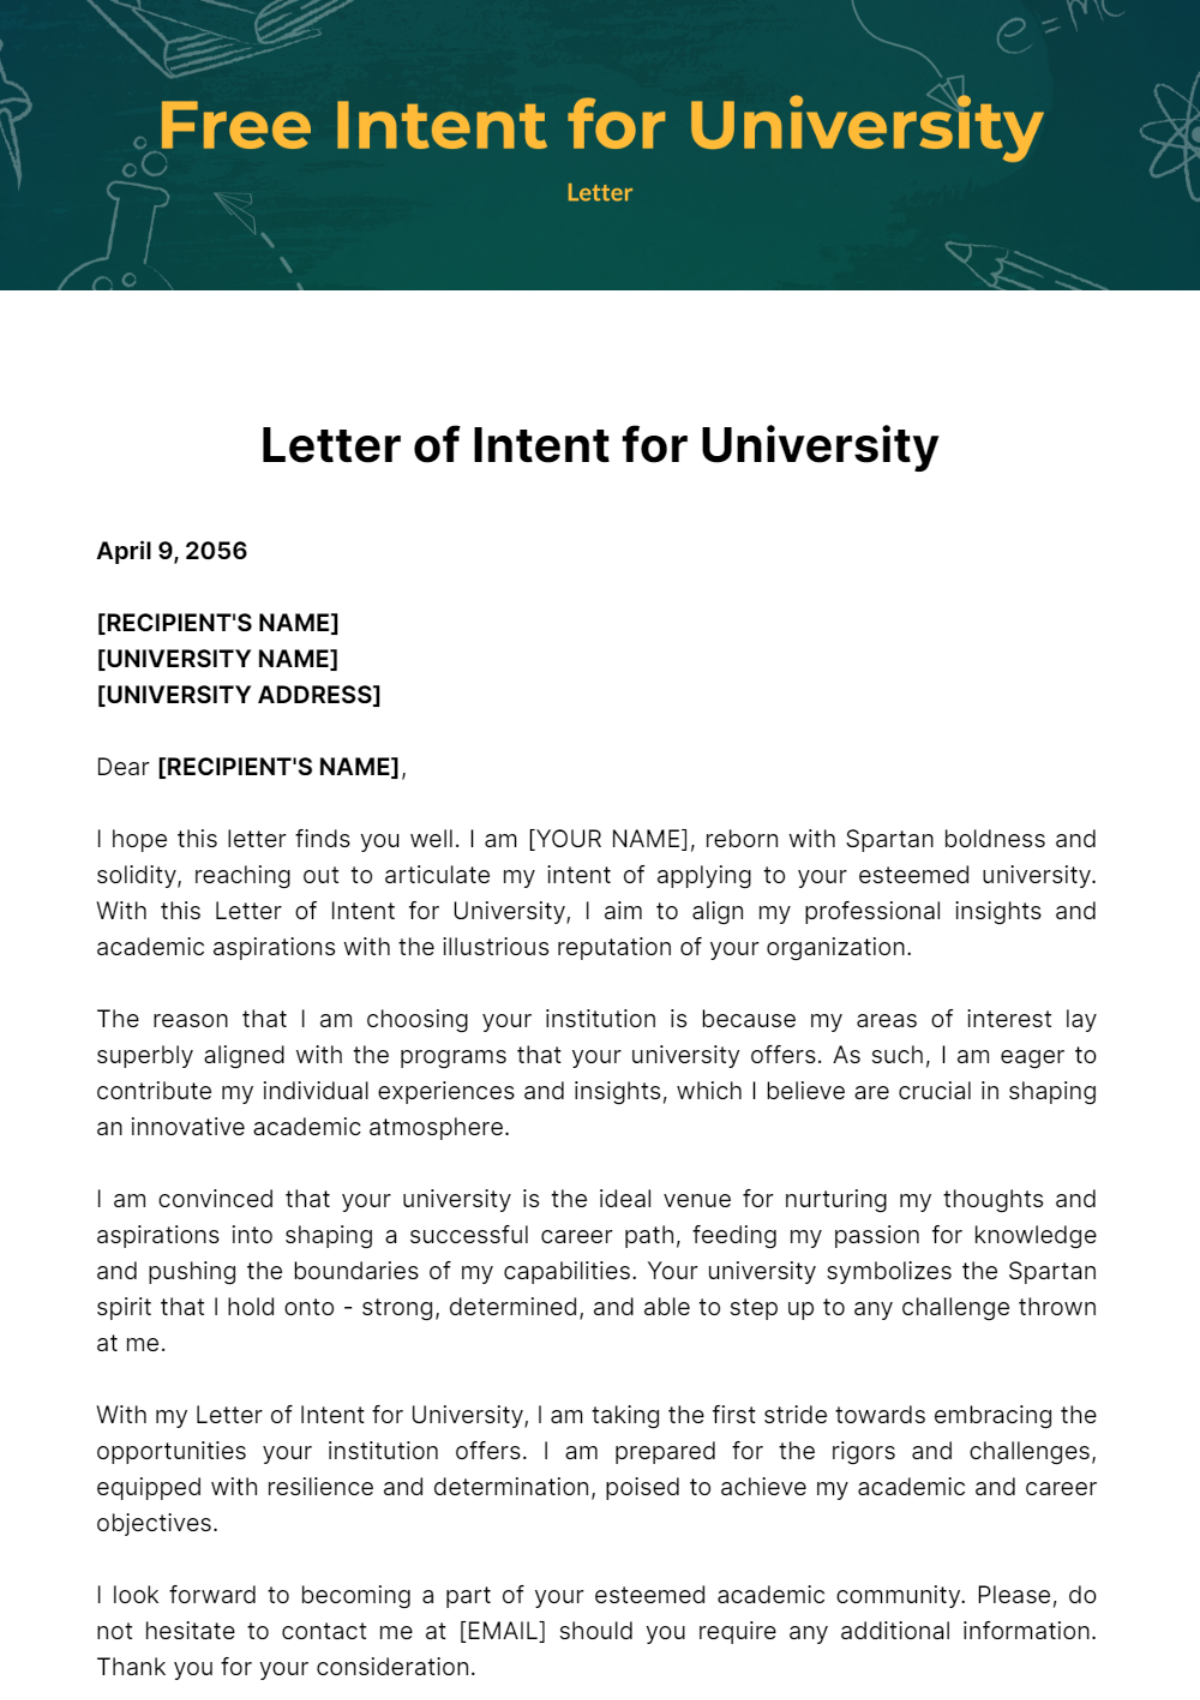 Free Letter of Intent for University Template